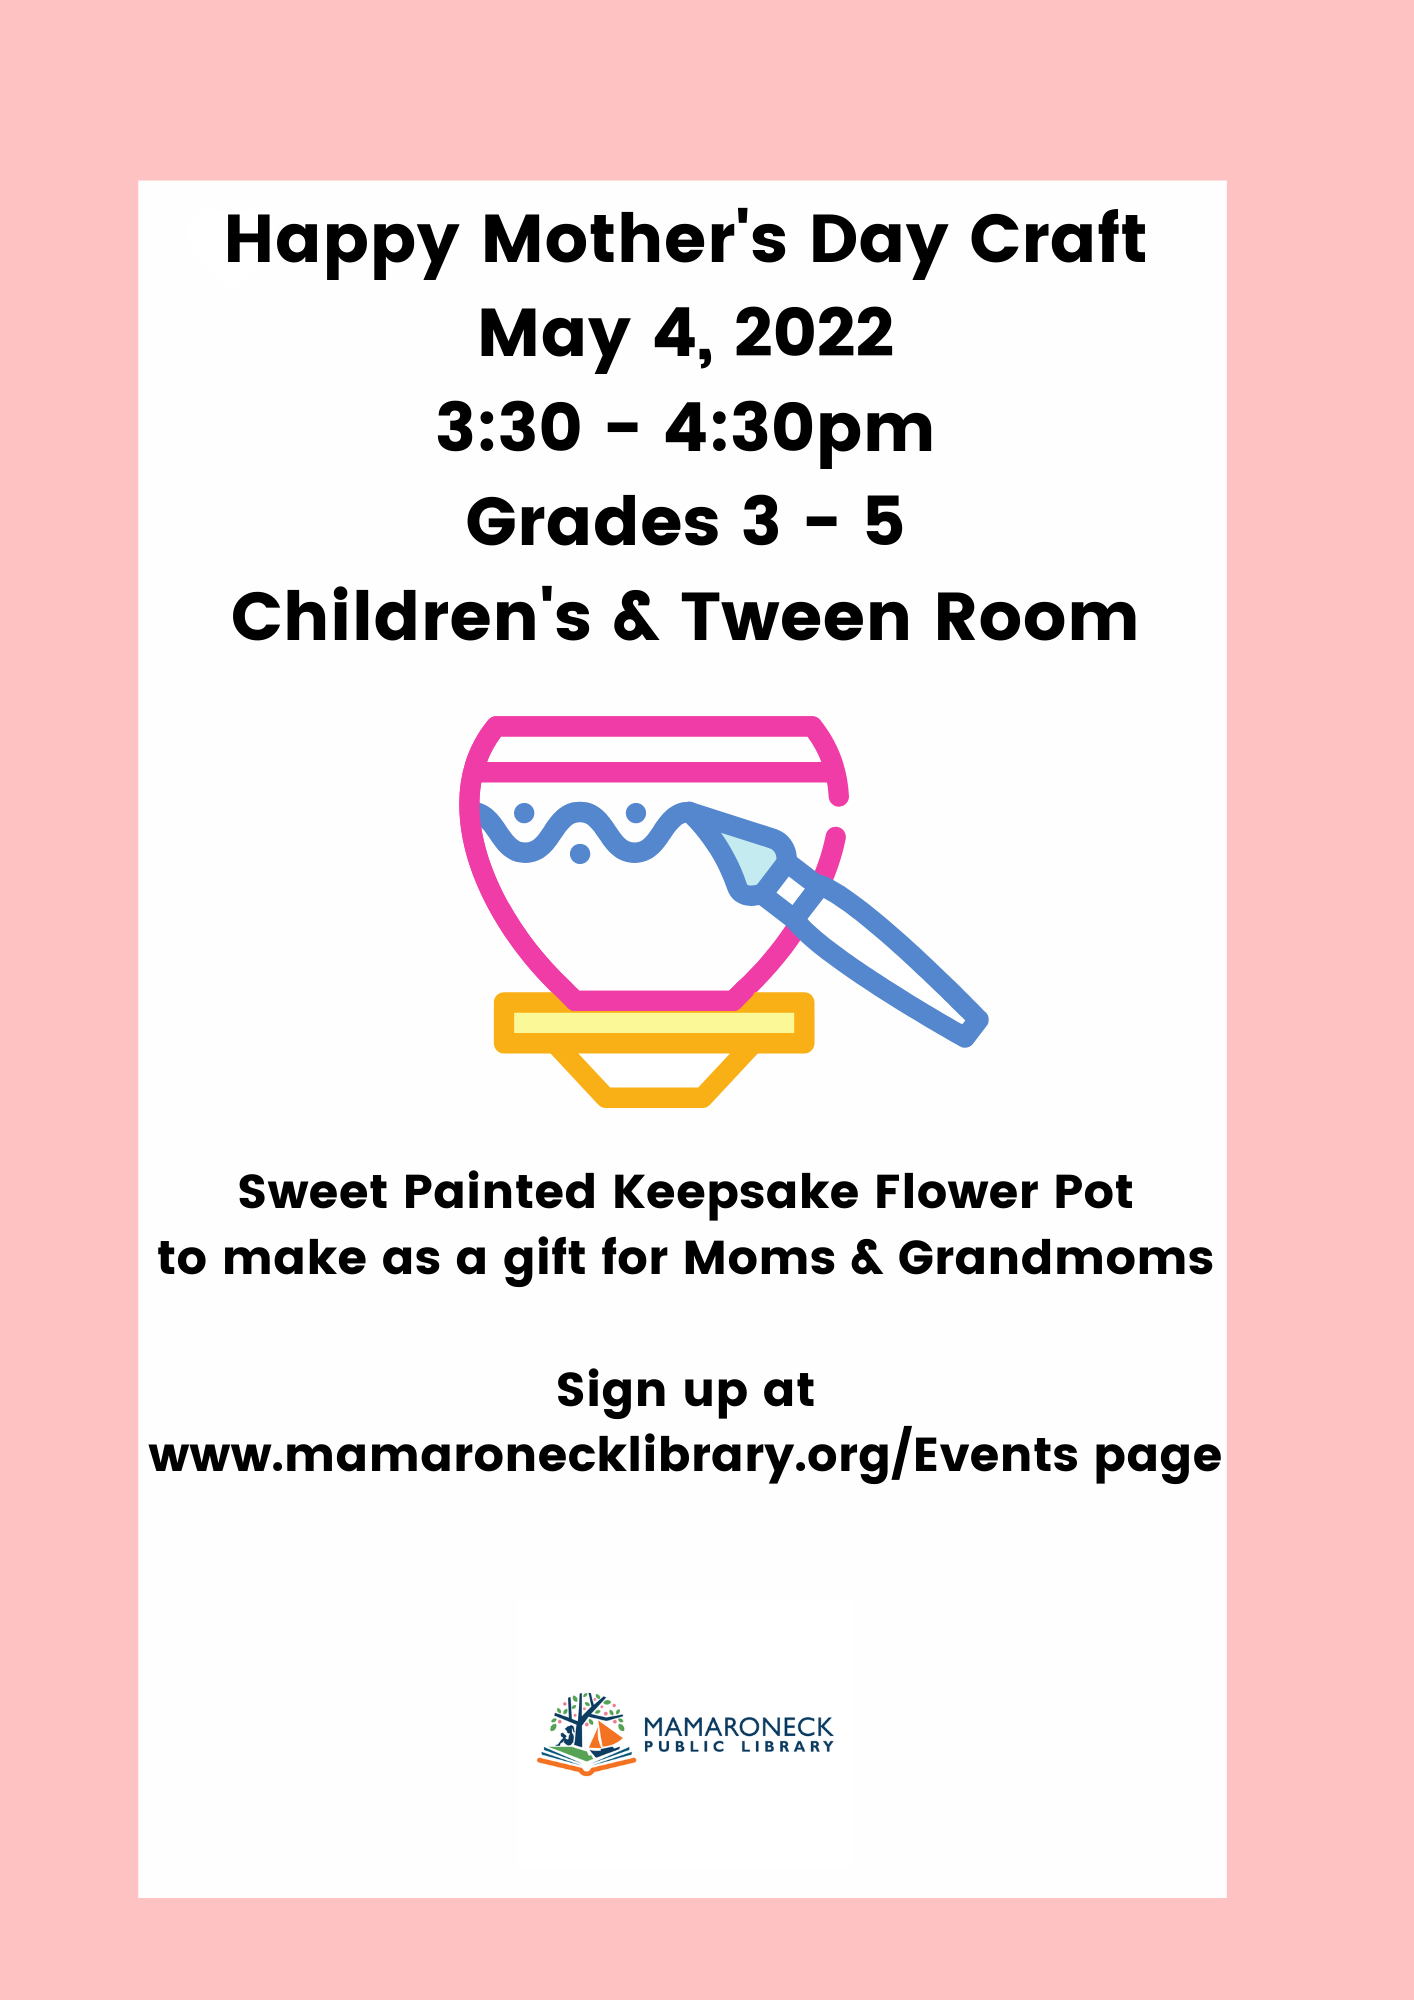 May 4 Mother's Day Craft in the children's room